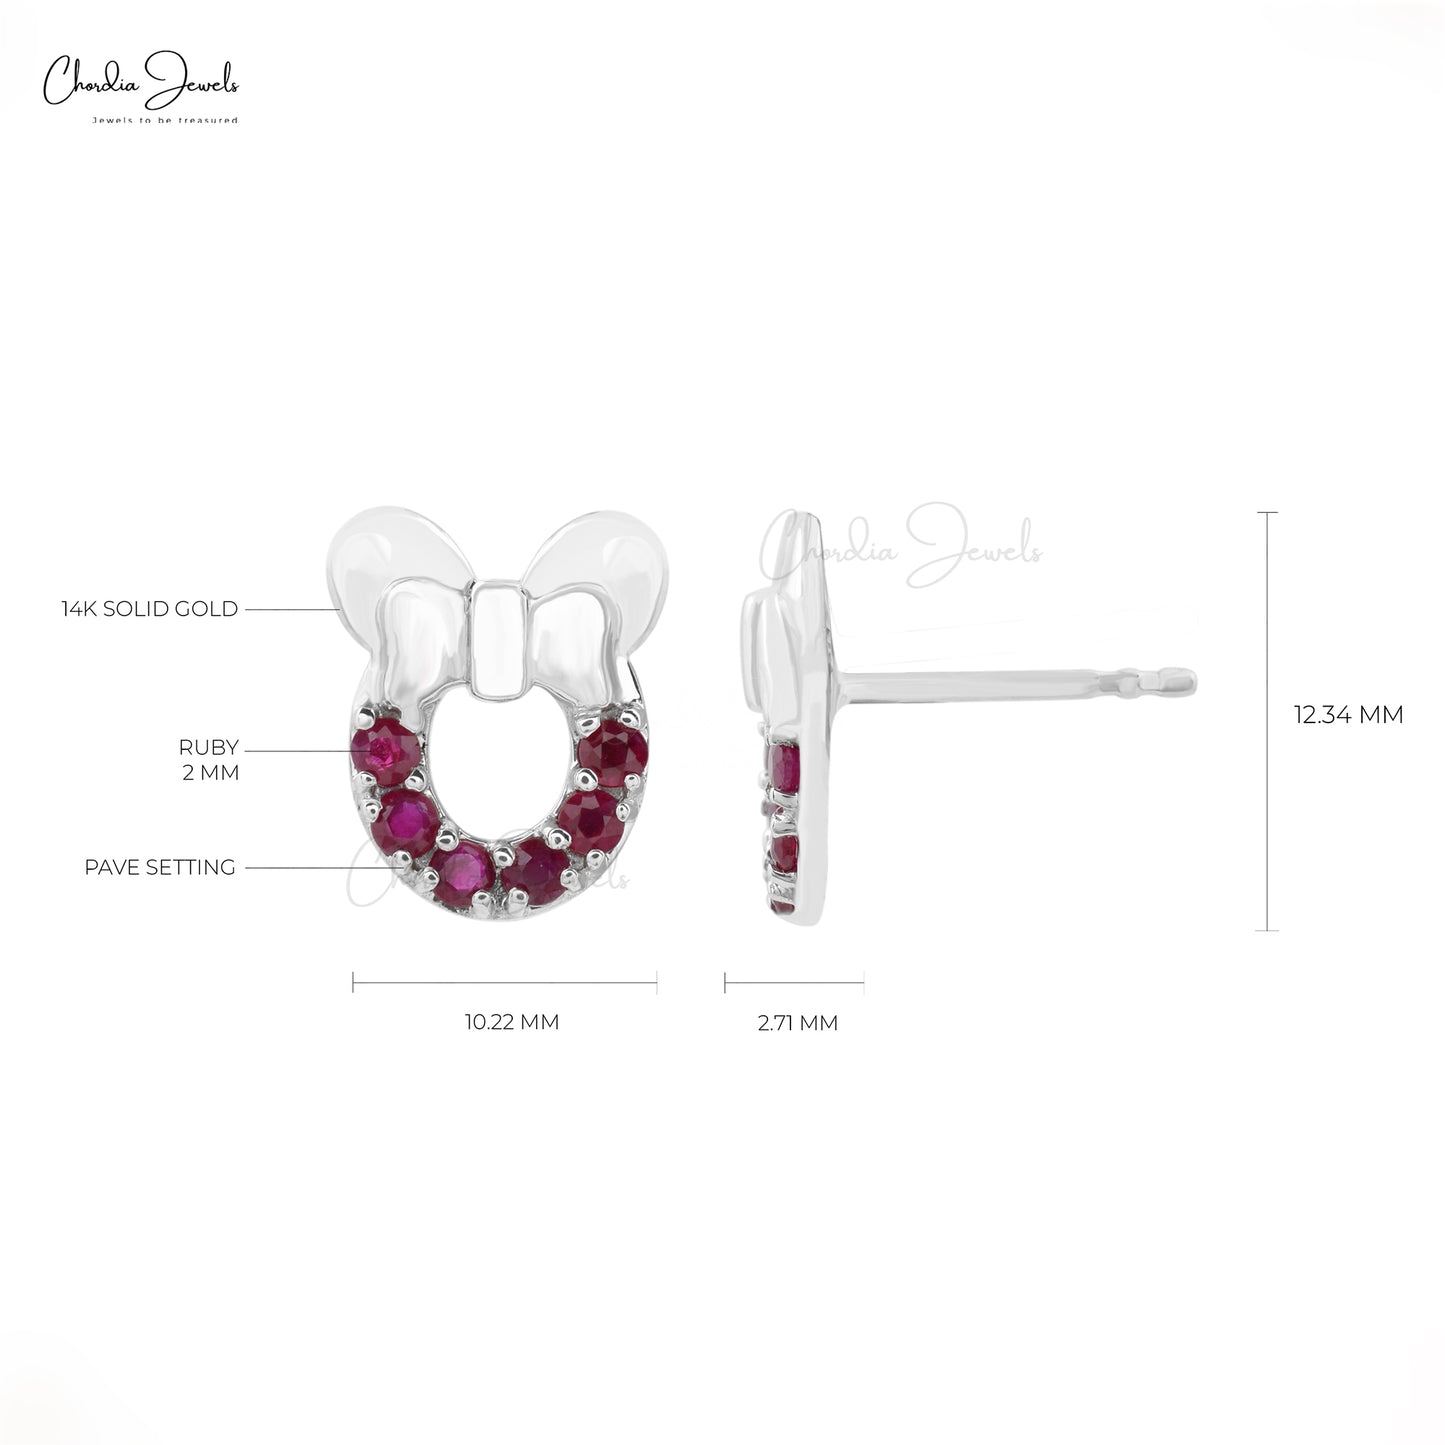 Load image into Gallery viewer, Genuine Red Ruby Earrings
